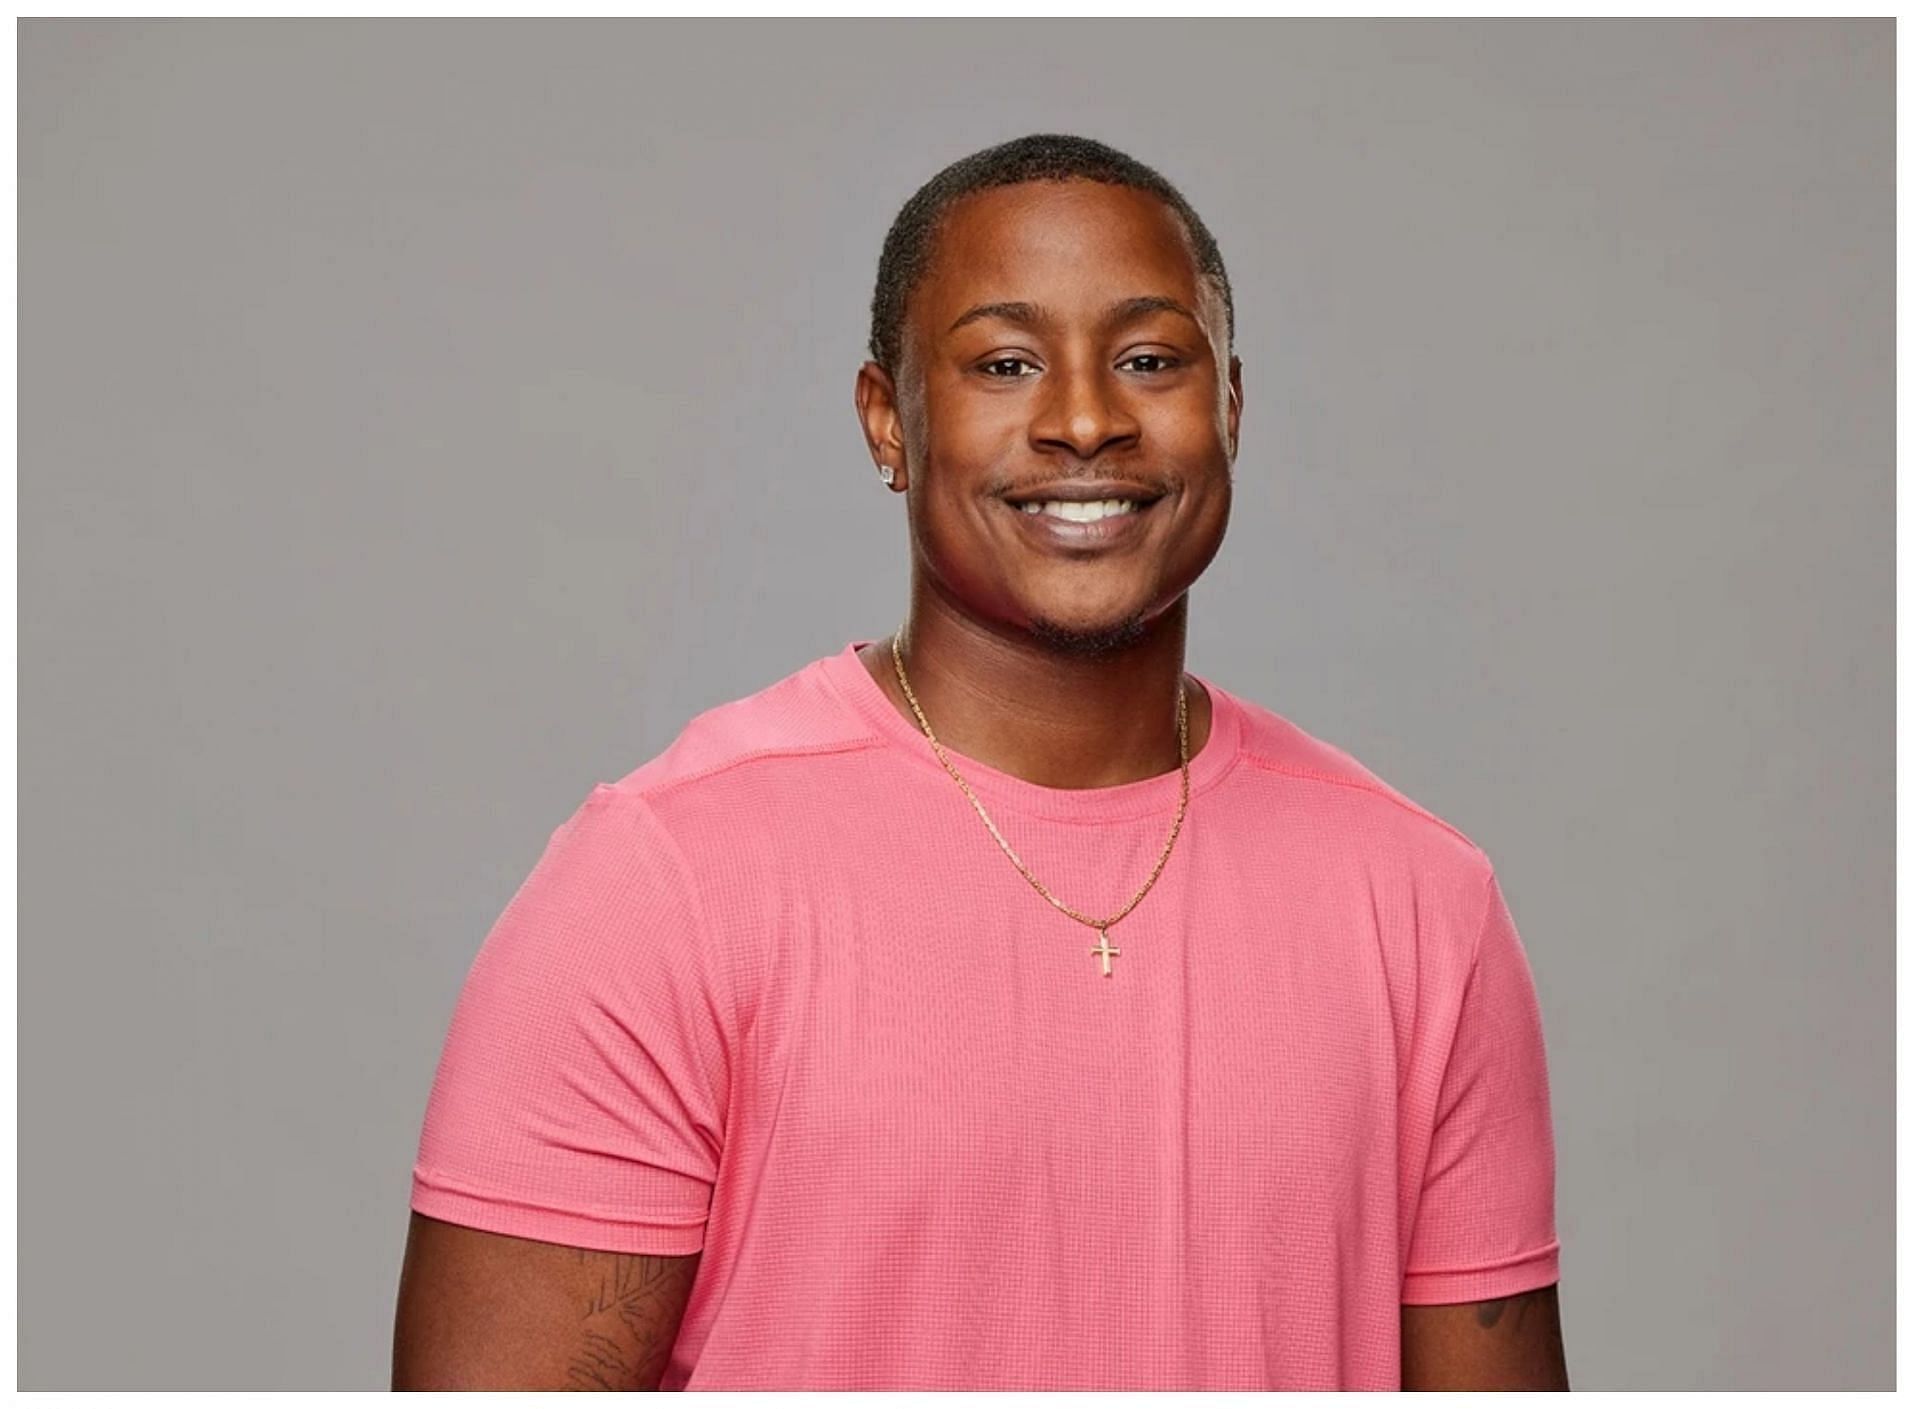 Jared Fields is not expected to be kicked off Big Brother 25. (Image via CBS)